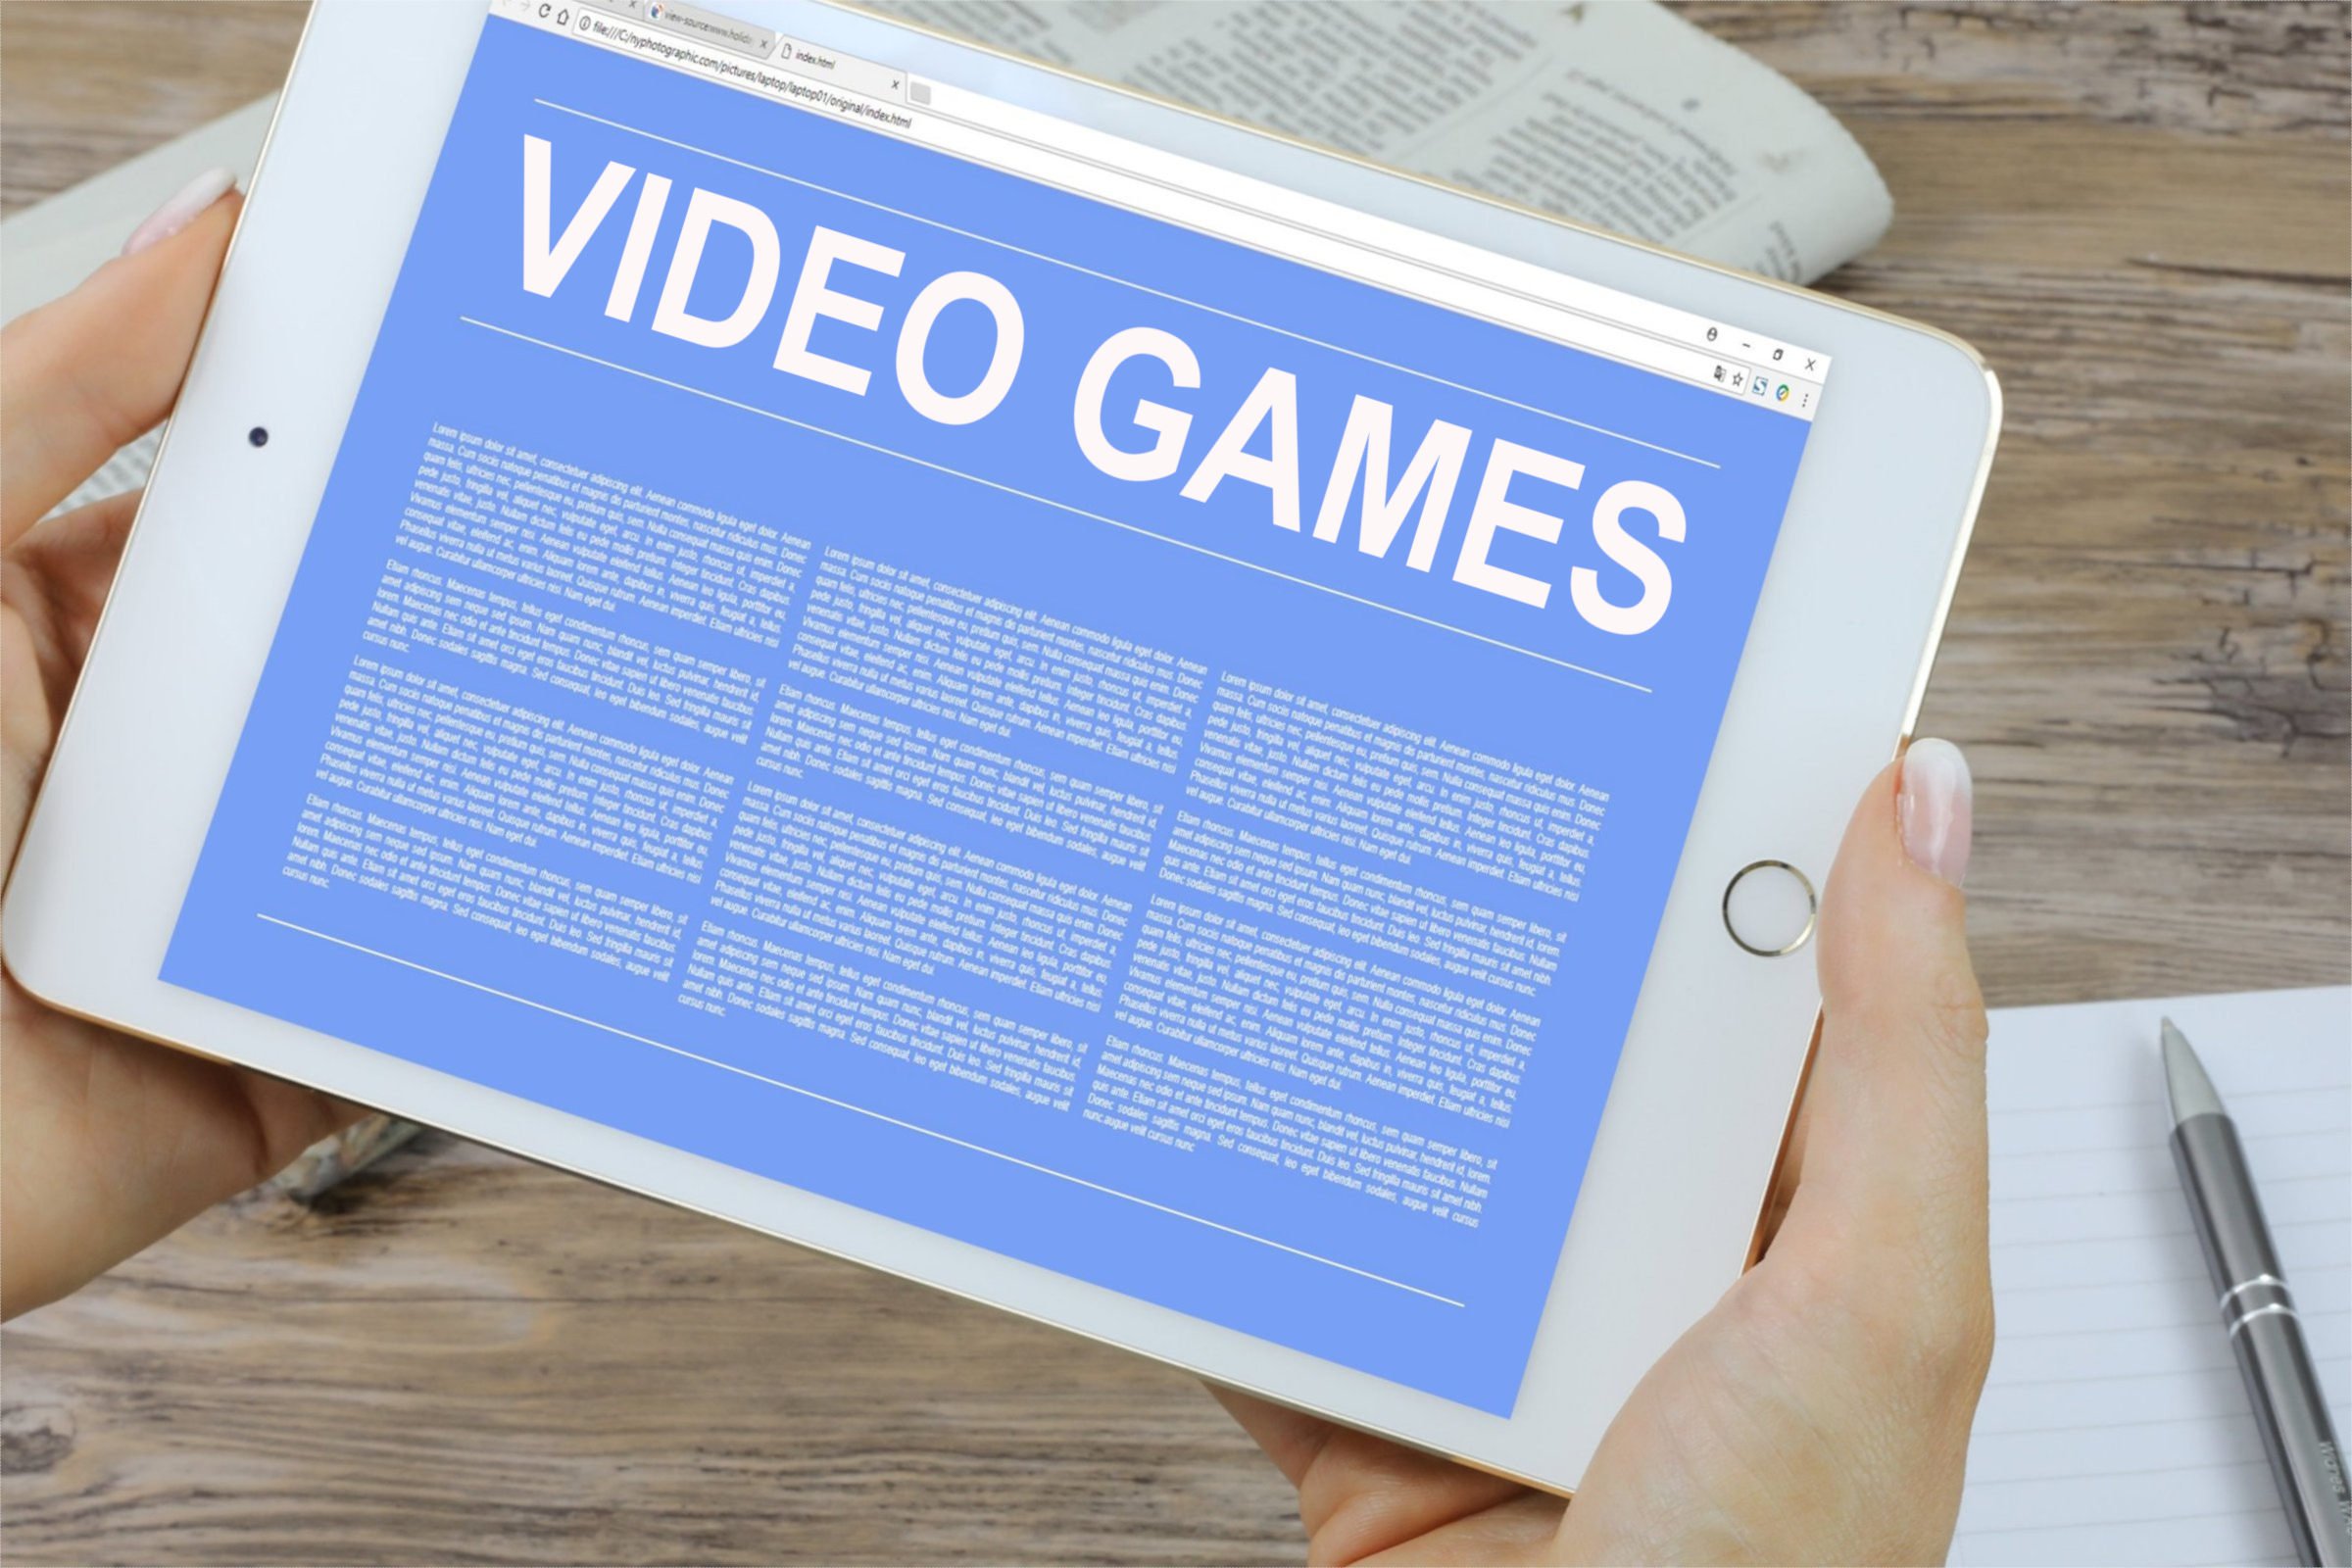 Video Games - Free of Charge Creative Commons Tablet 1 image